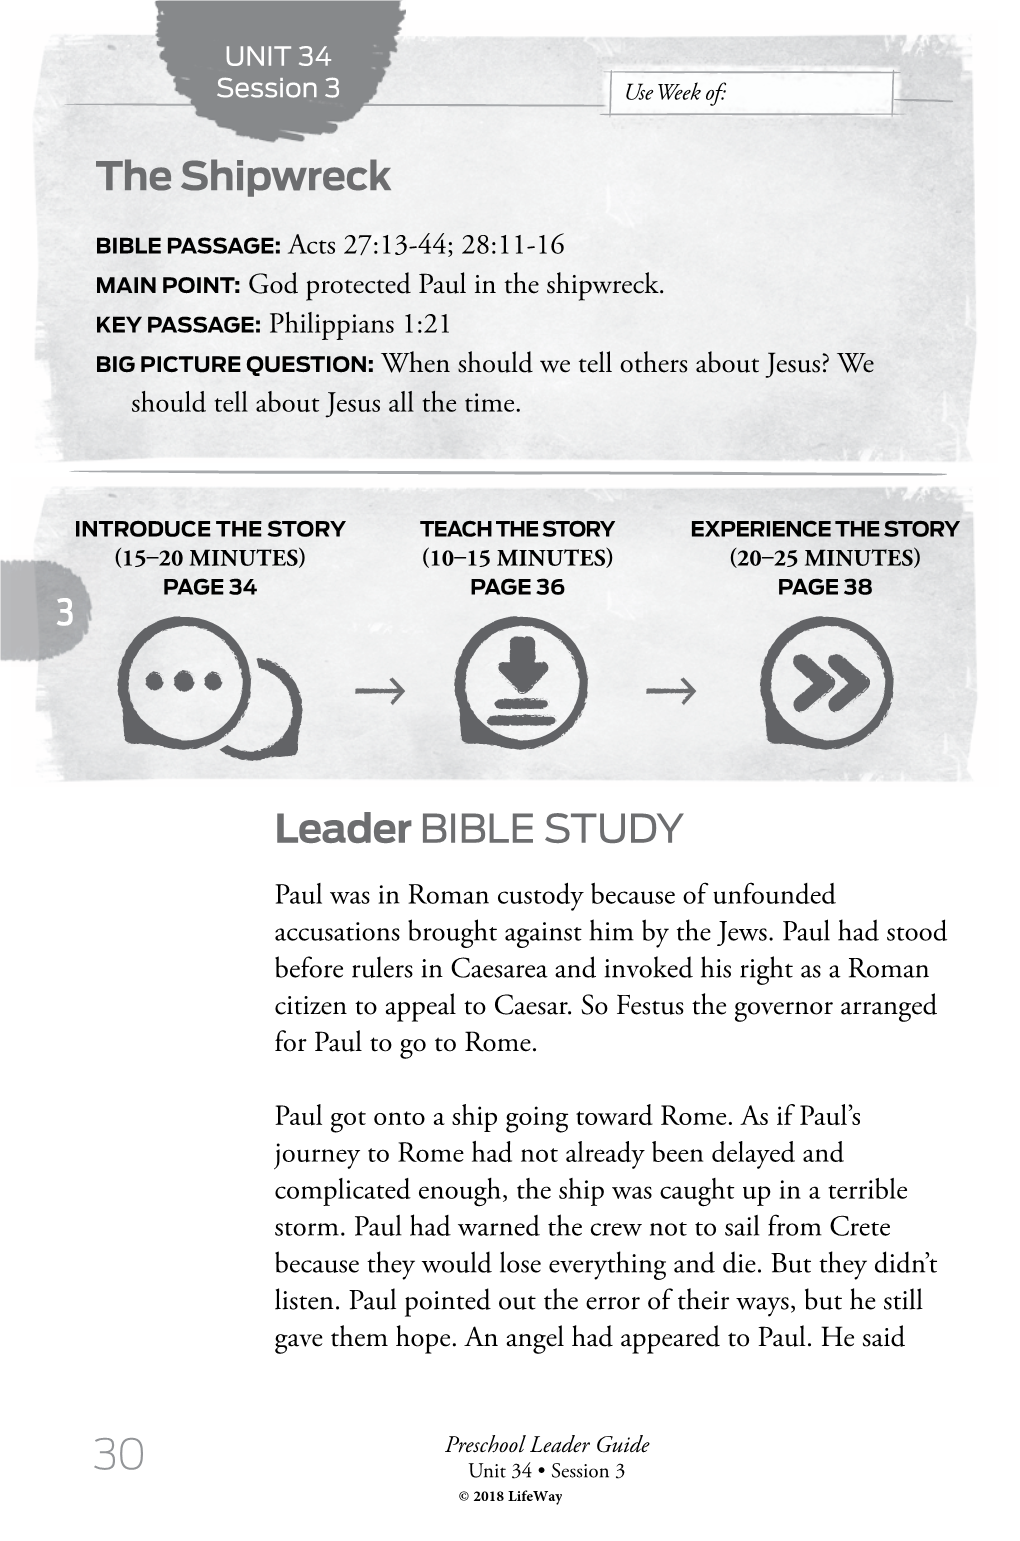 Leader BIBLE STUDY the Shipwreck